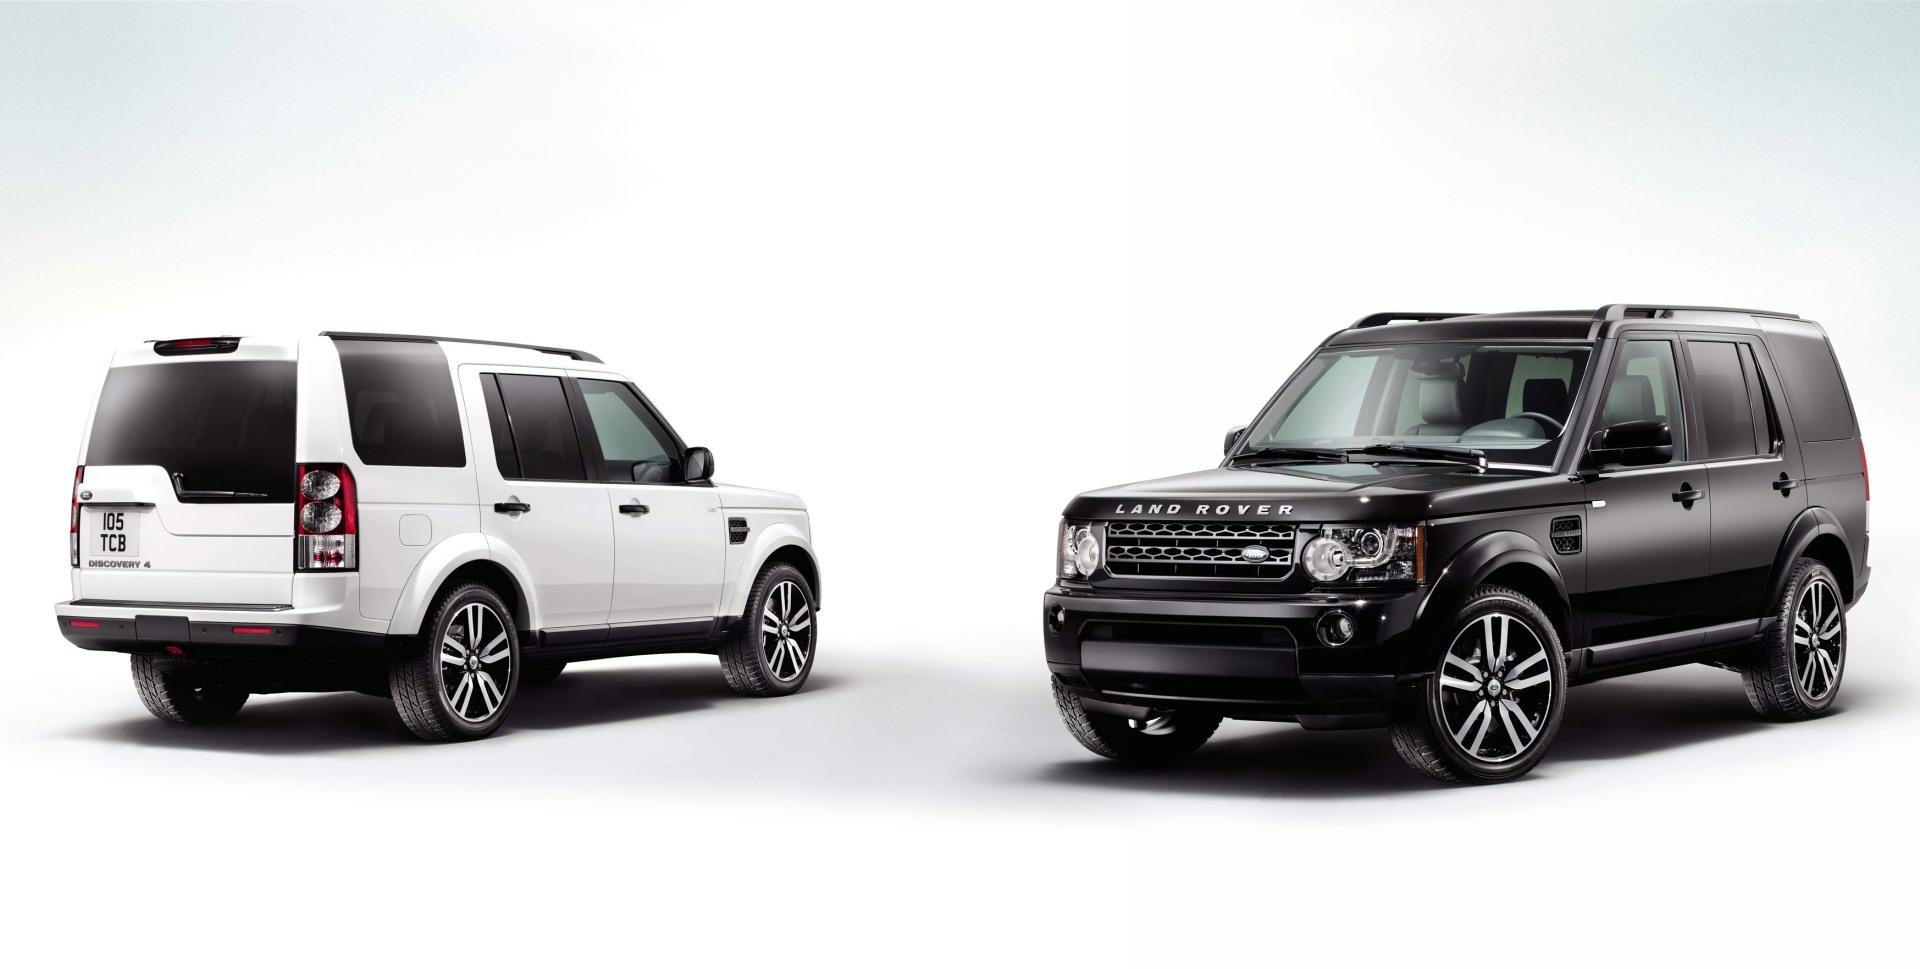 2010 Land Rover Discovery 4 Landmark Limited Editions News and Information